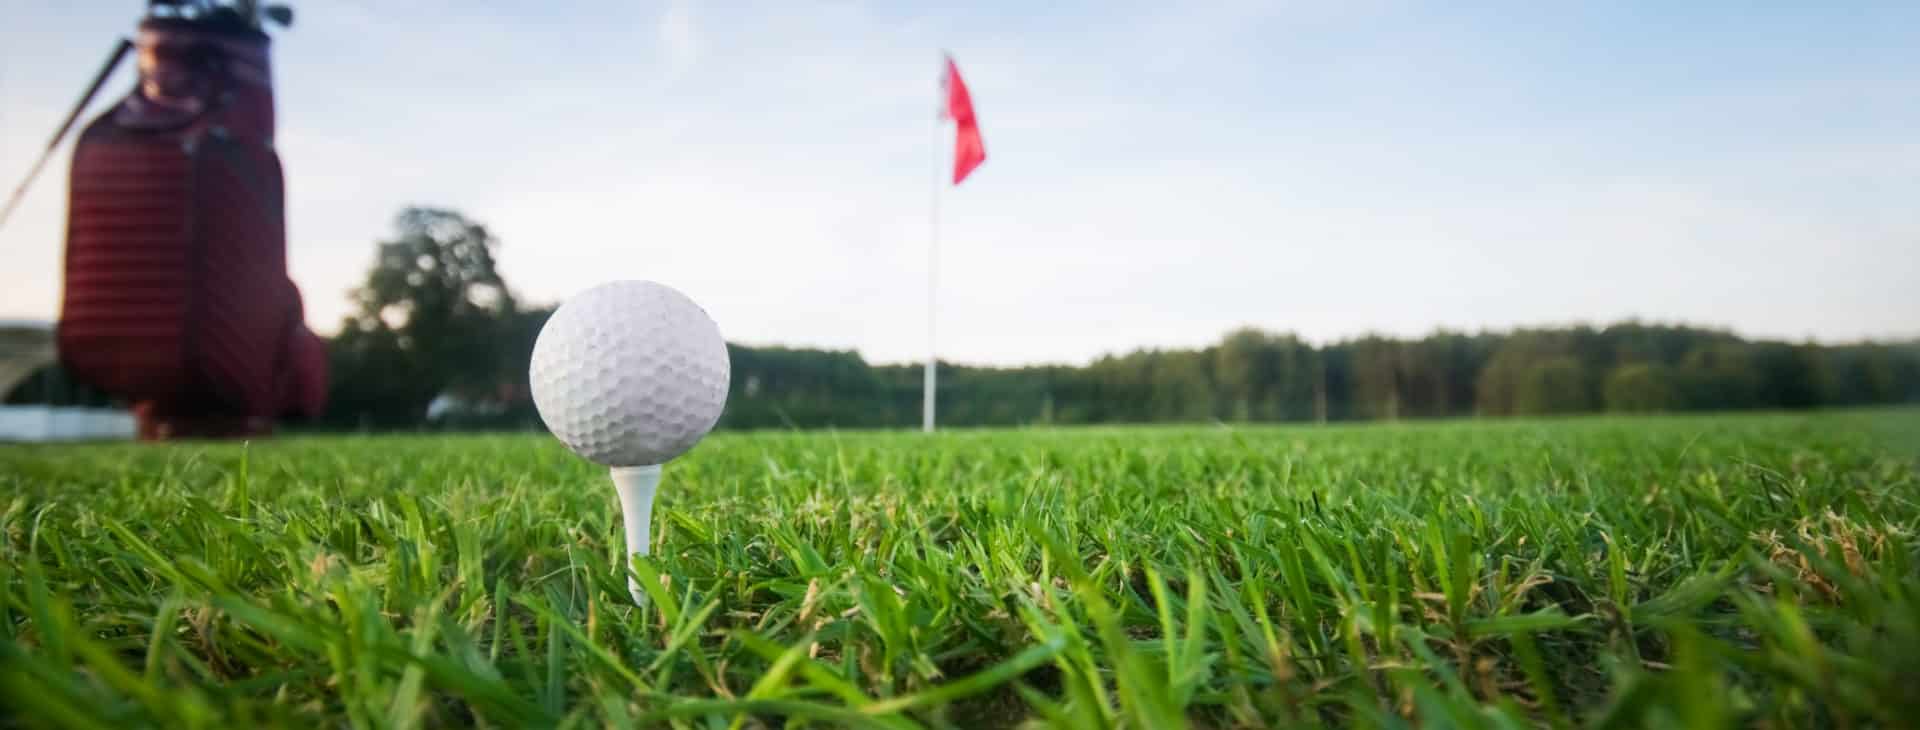 Choose Coast to Coast Hole in One to help you add an exciting Hole-in-One contest to your next golf event!